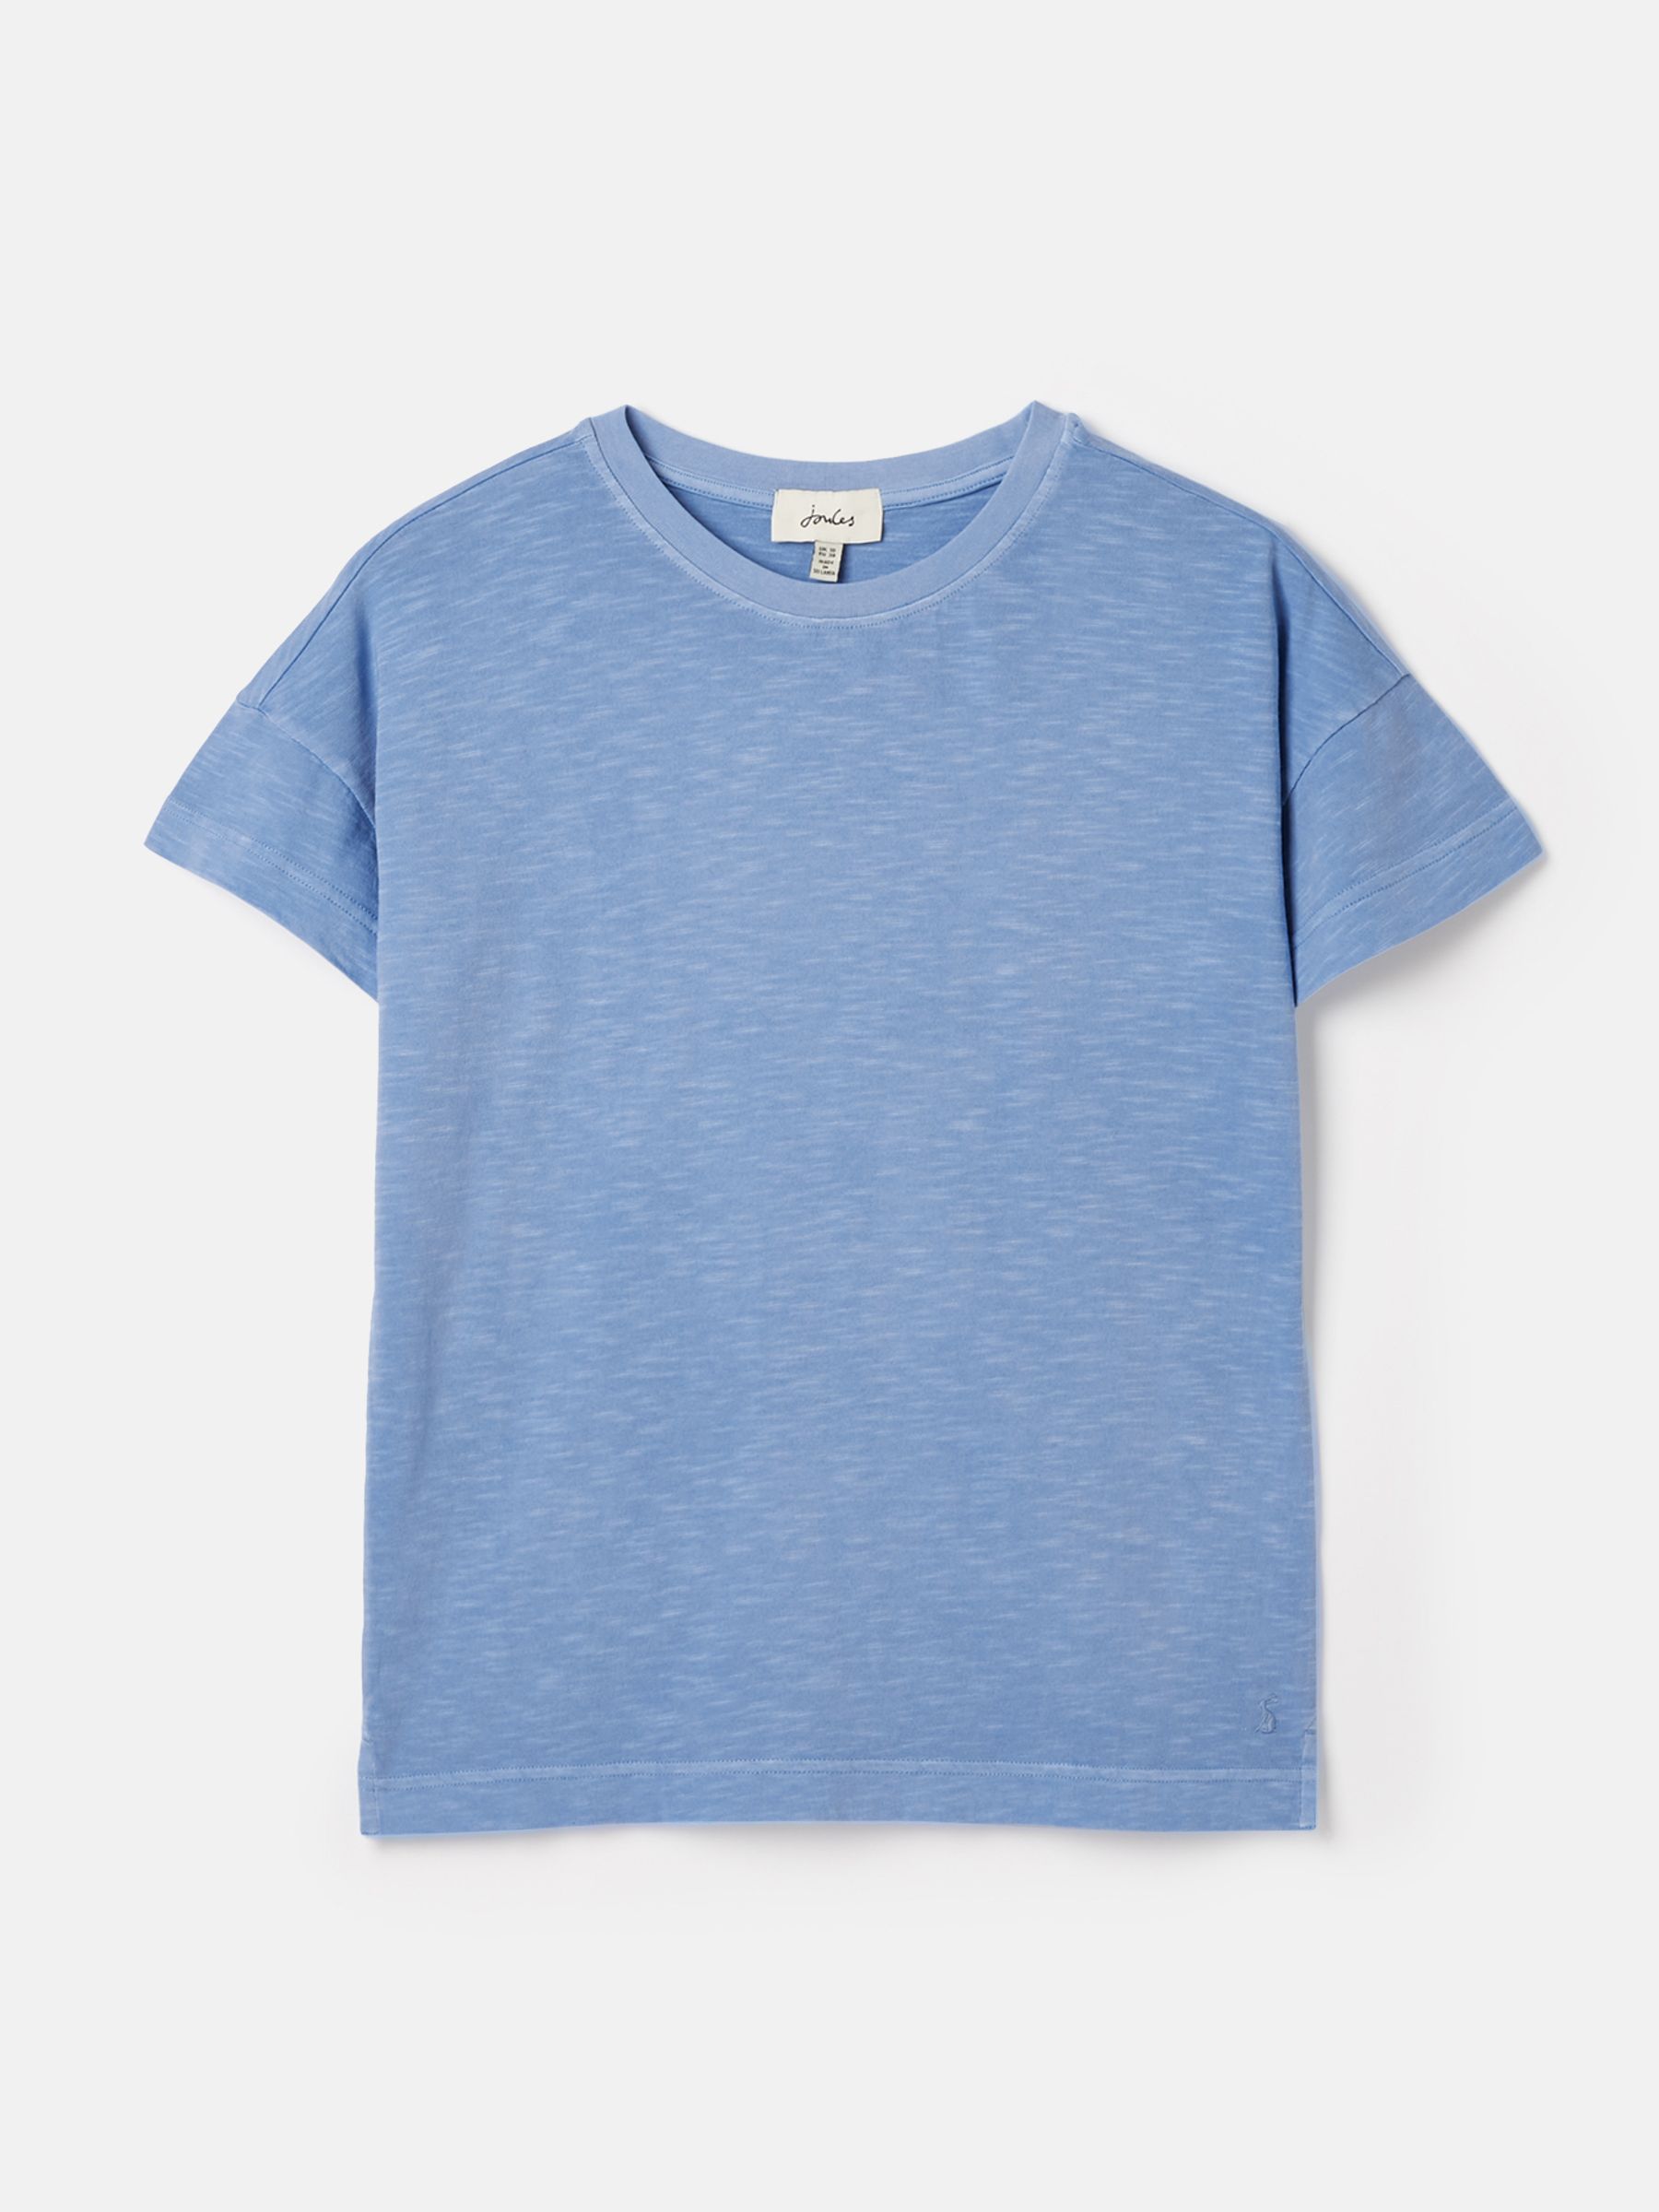 Buy Joules Macey Short Sleeve T-Shirt from the Joules online shop